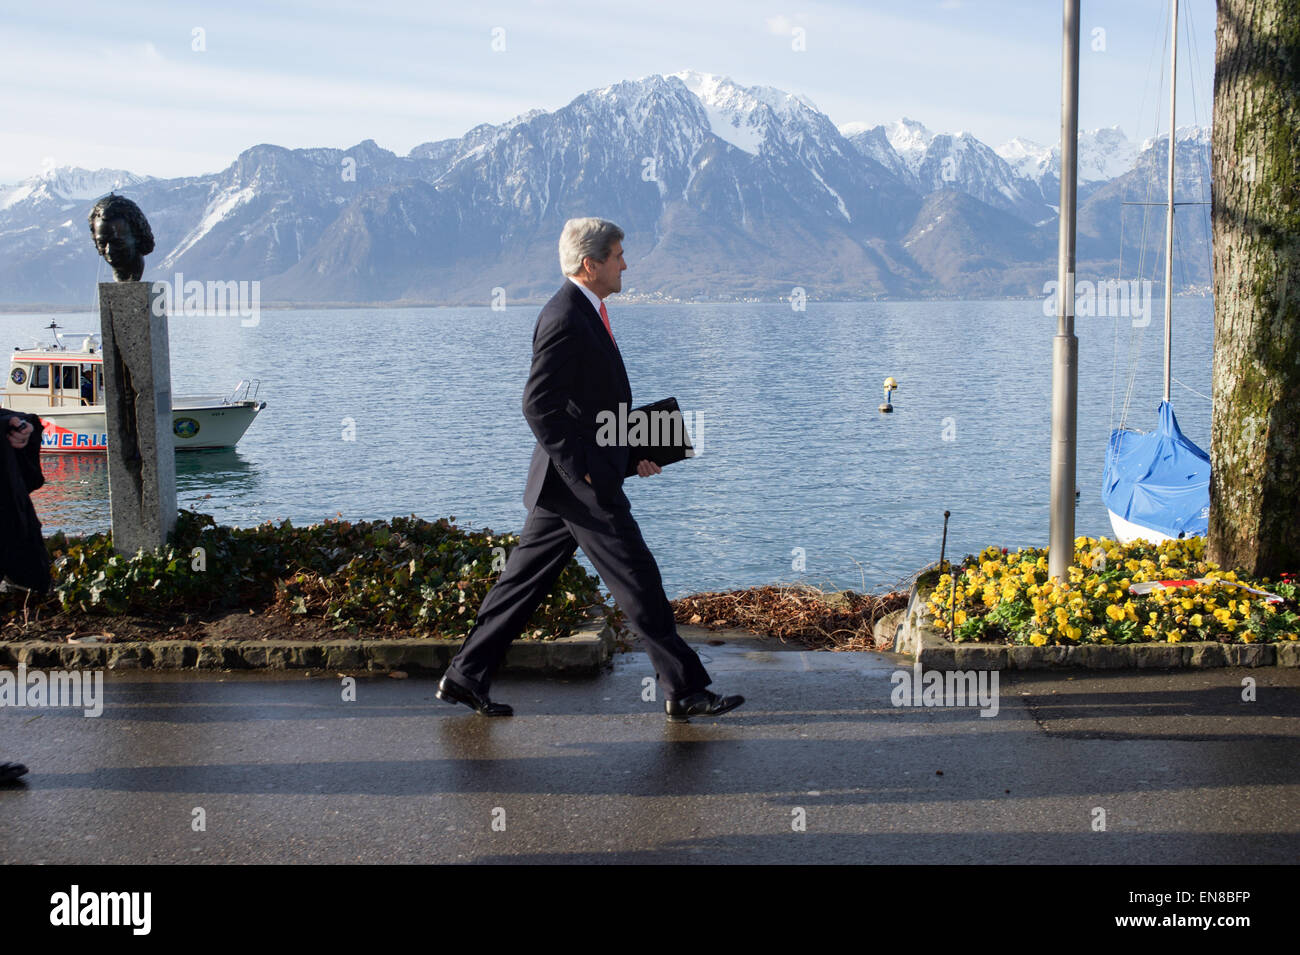 U.S. Secretary of State John Kerry passes a statue of jazz legend Miles Davis on March 3, 2015, as he walks along Lake Geneva in Montreux, Switzerland, scene of the annual Montreux Jazz Festival, before resuming negotiations with Iranian Foreign Minister Javad Zarif about the future of his country's nuclear program. Stock Photo